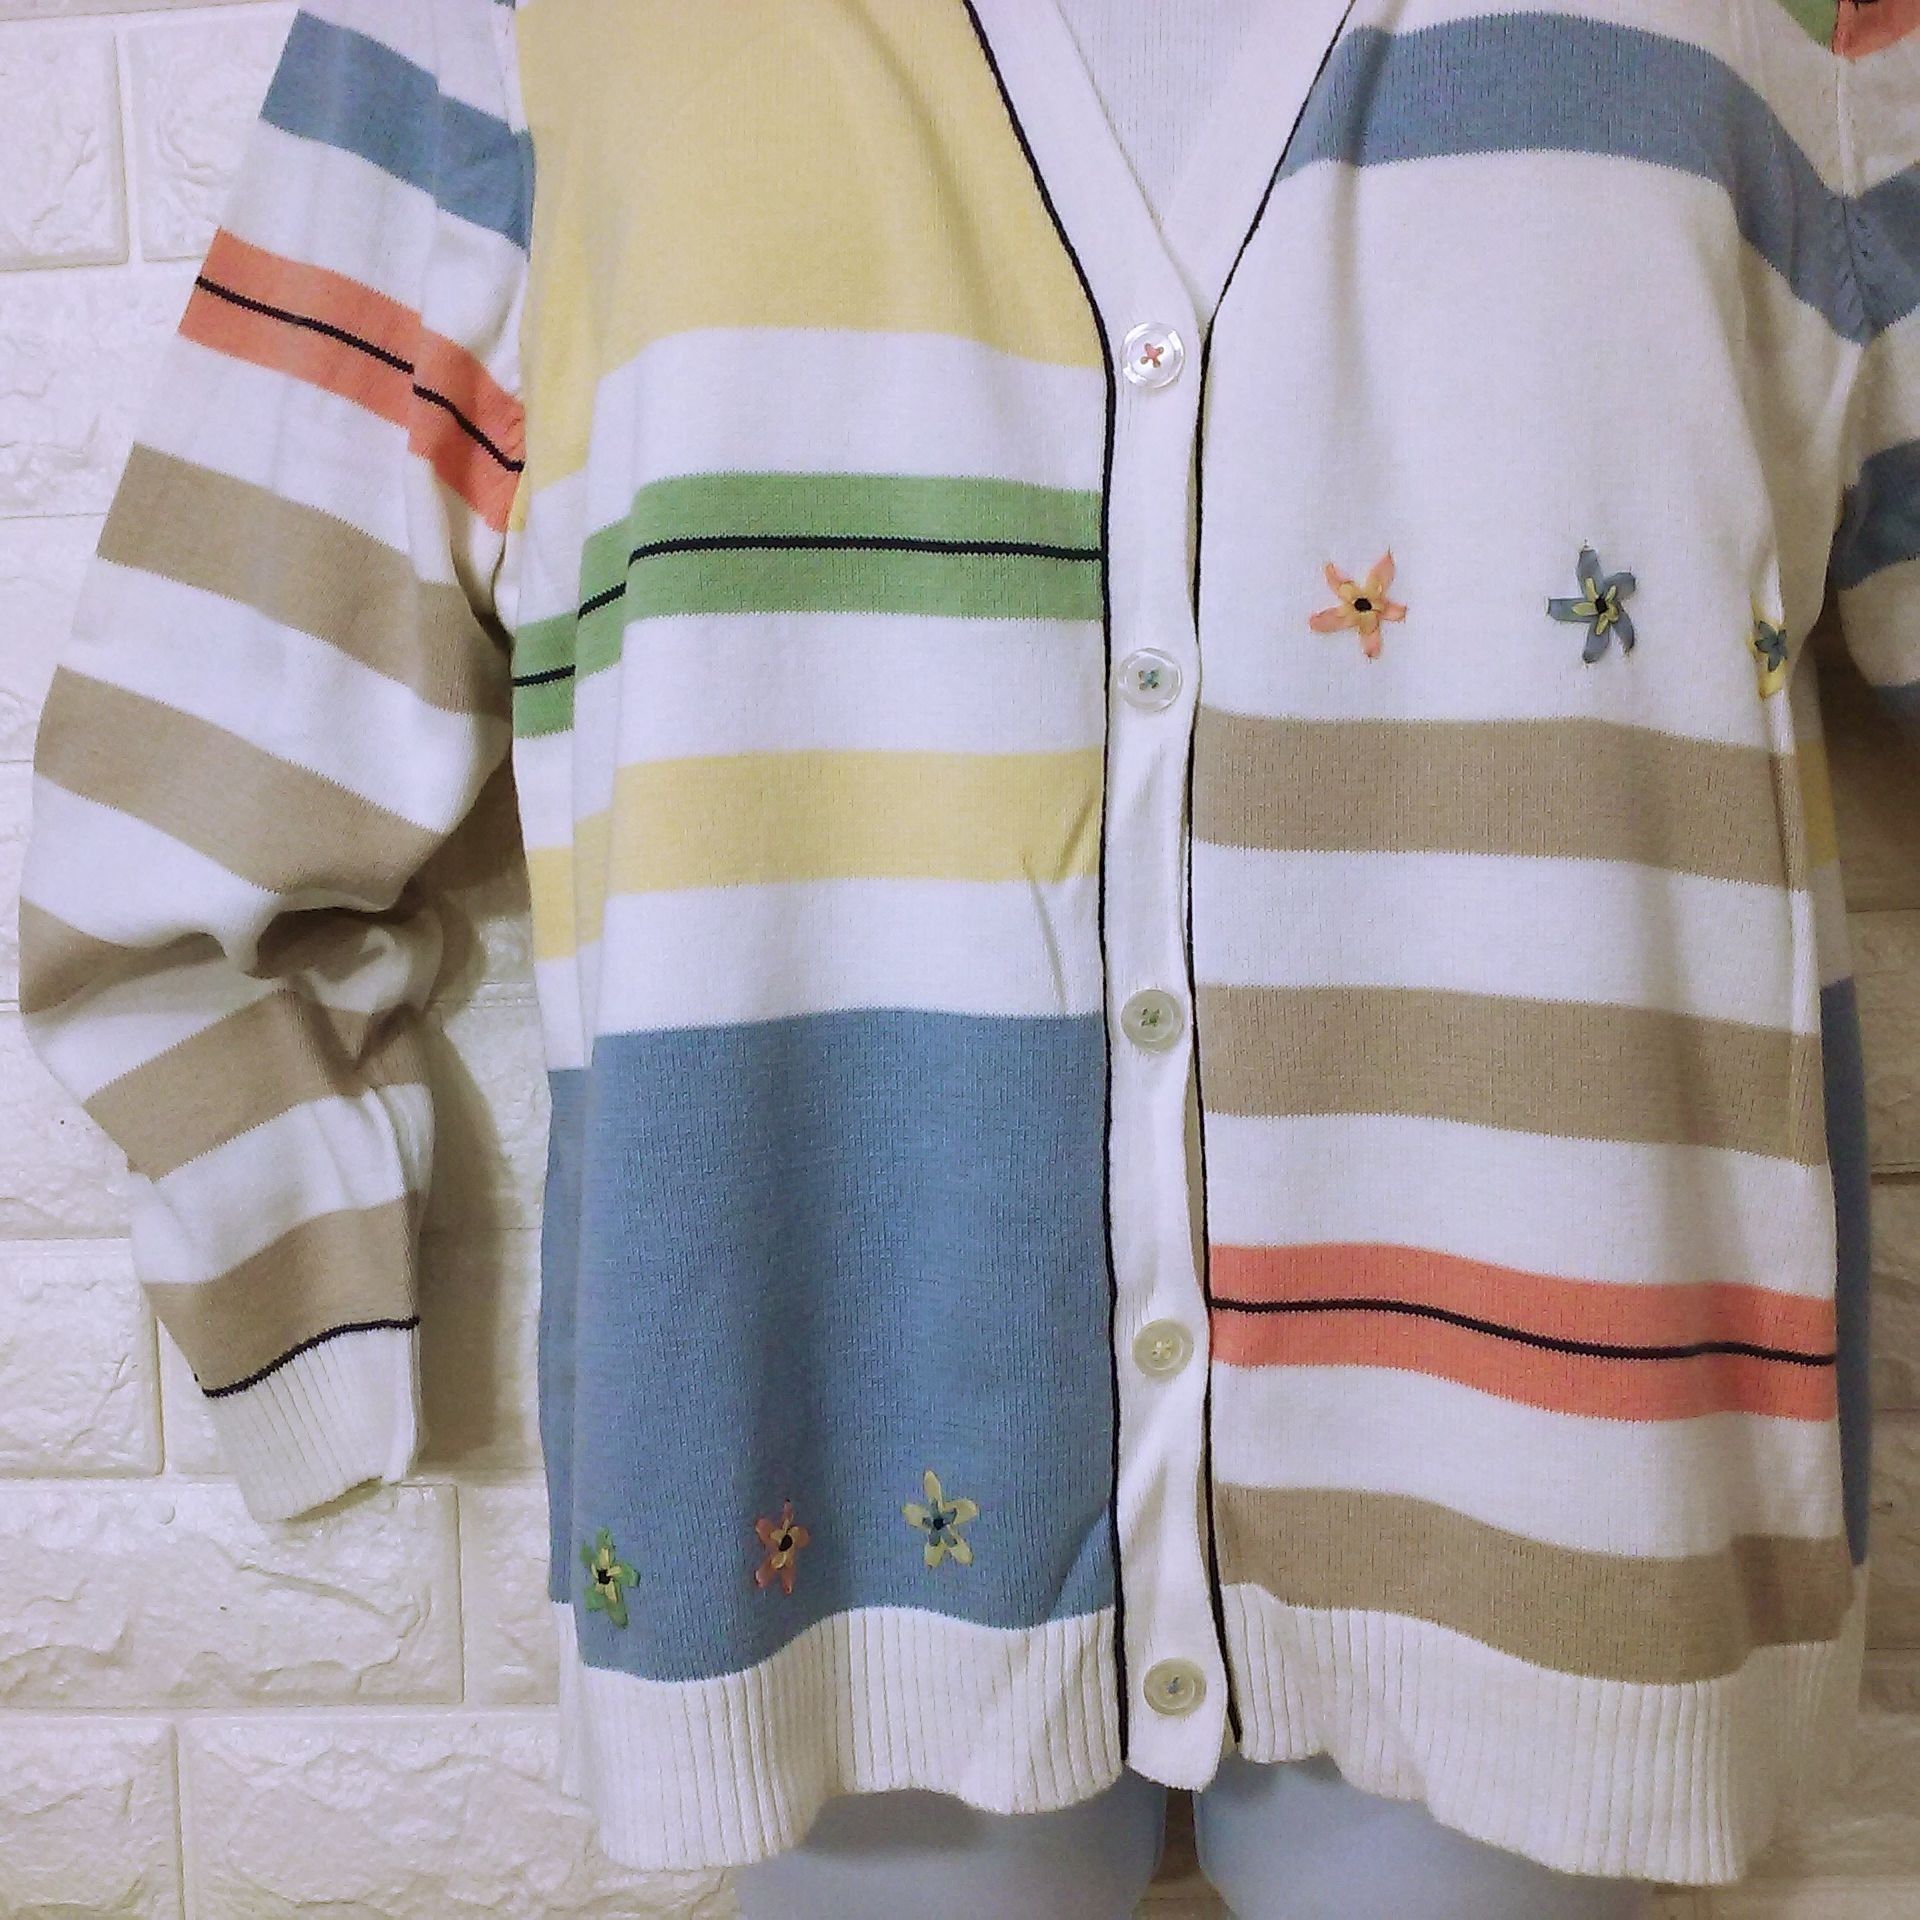 Vintage 90s Koret Knit Cardigan Top Novelty Sweater Striped Classic Size L / US 10 / IT 46 - 2 Preview